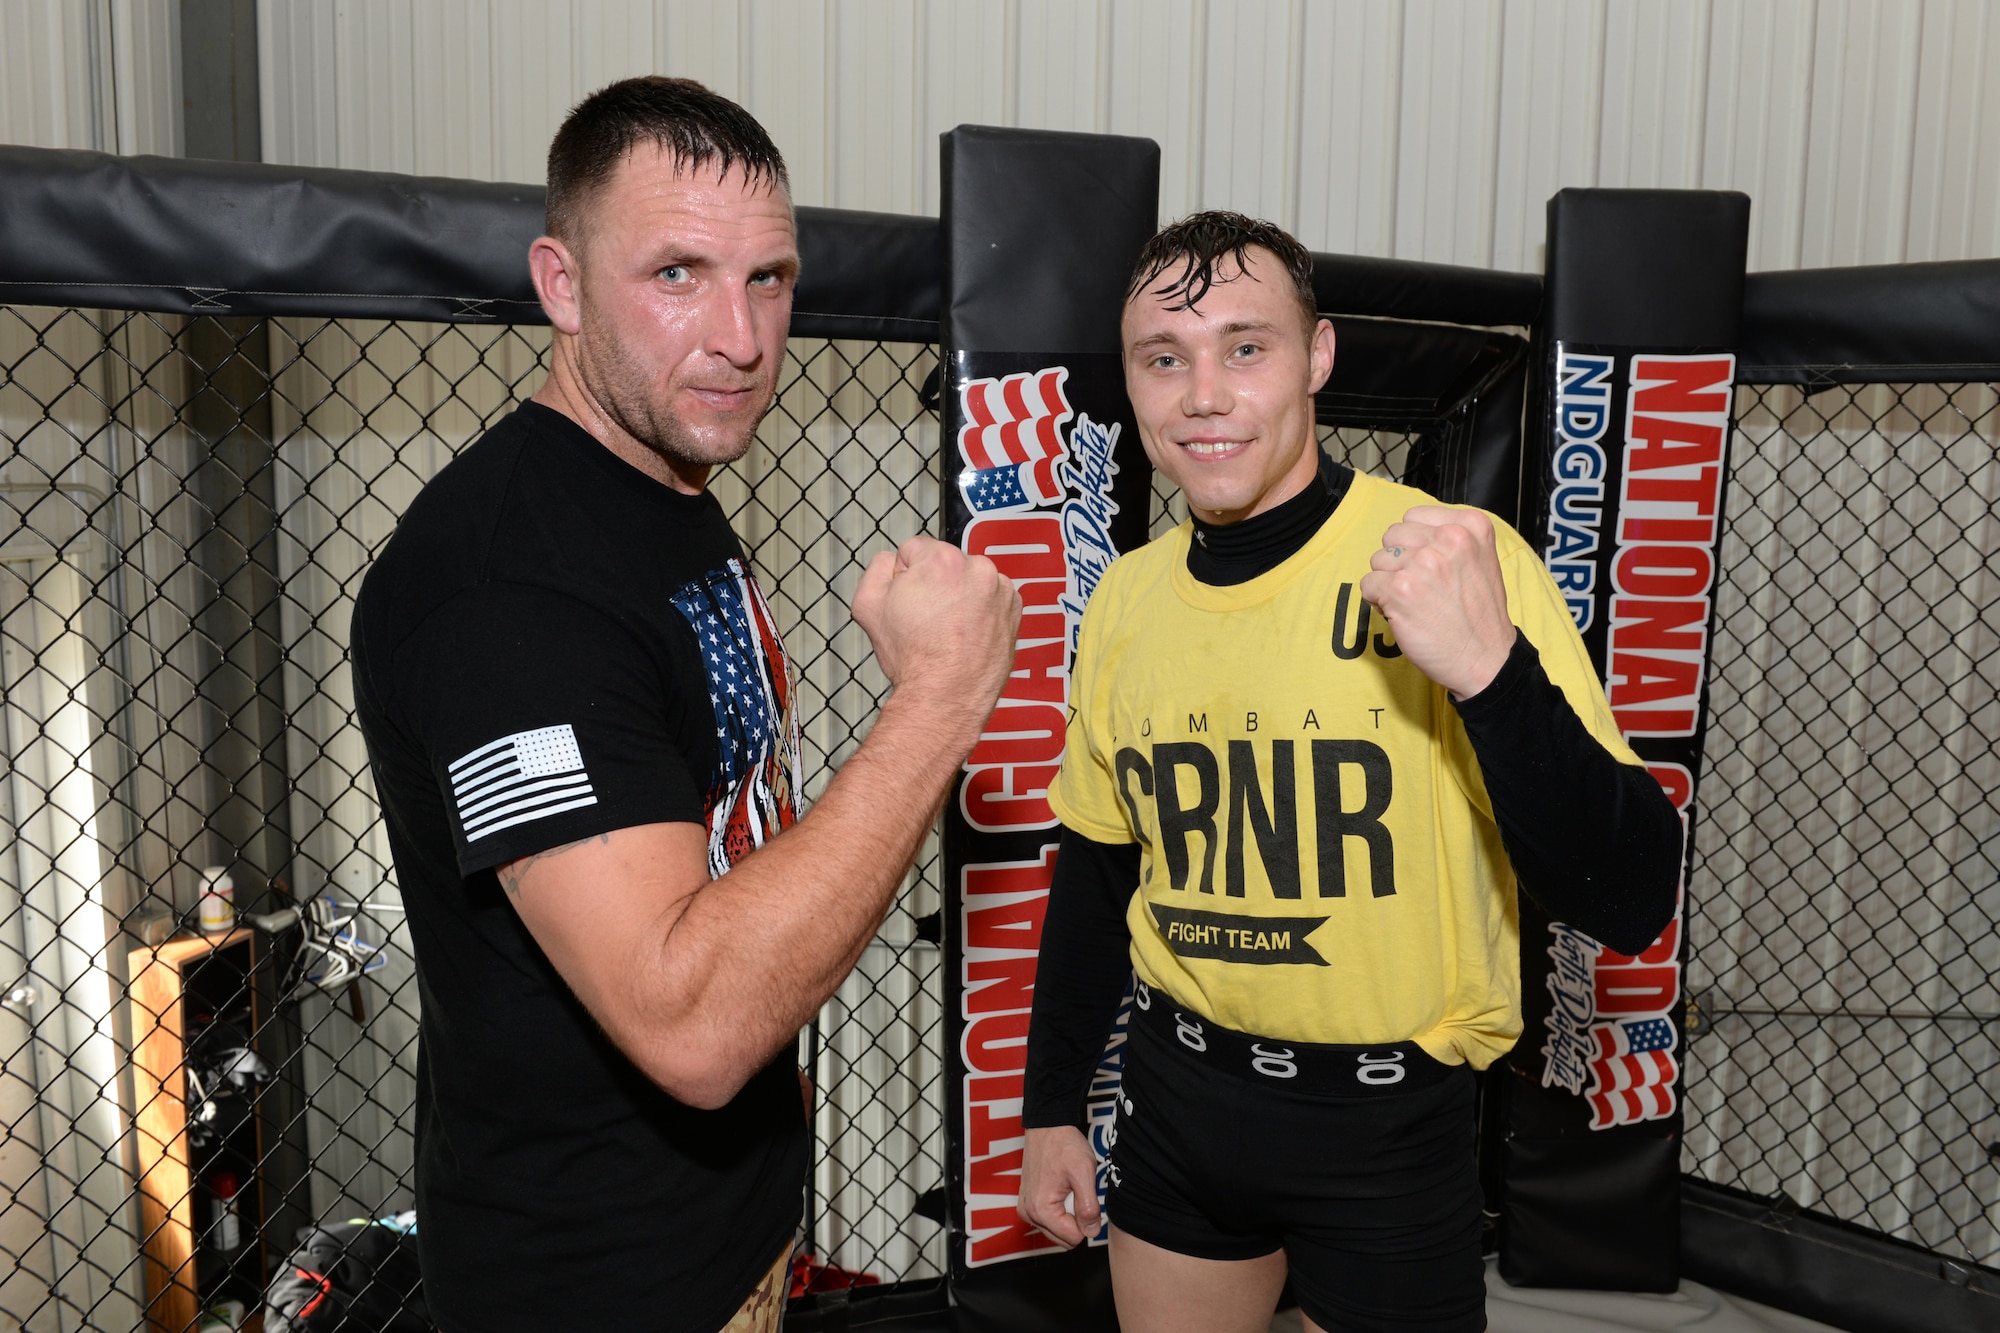 Senior Airman Michael Bullen, right, and Tech. Sgt. Gemenie Strehlow, both of the 119th Security Forces Squadron pose for a photo in the mixed martial arts cage at a Fargo, North Dakota, gym, May 8, 2015. The Airmen are training at the gym to enhance their fitness and skills to be better prepared in their career field for potential threats on duty. Bullen is scheduled for a competitive mixed martial arts match May 16 in Detroit Lakes, Minnesota. (U.S. Air National Guard photo by Senior Master Sgt. David H. Lipp/Released)